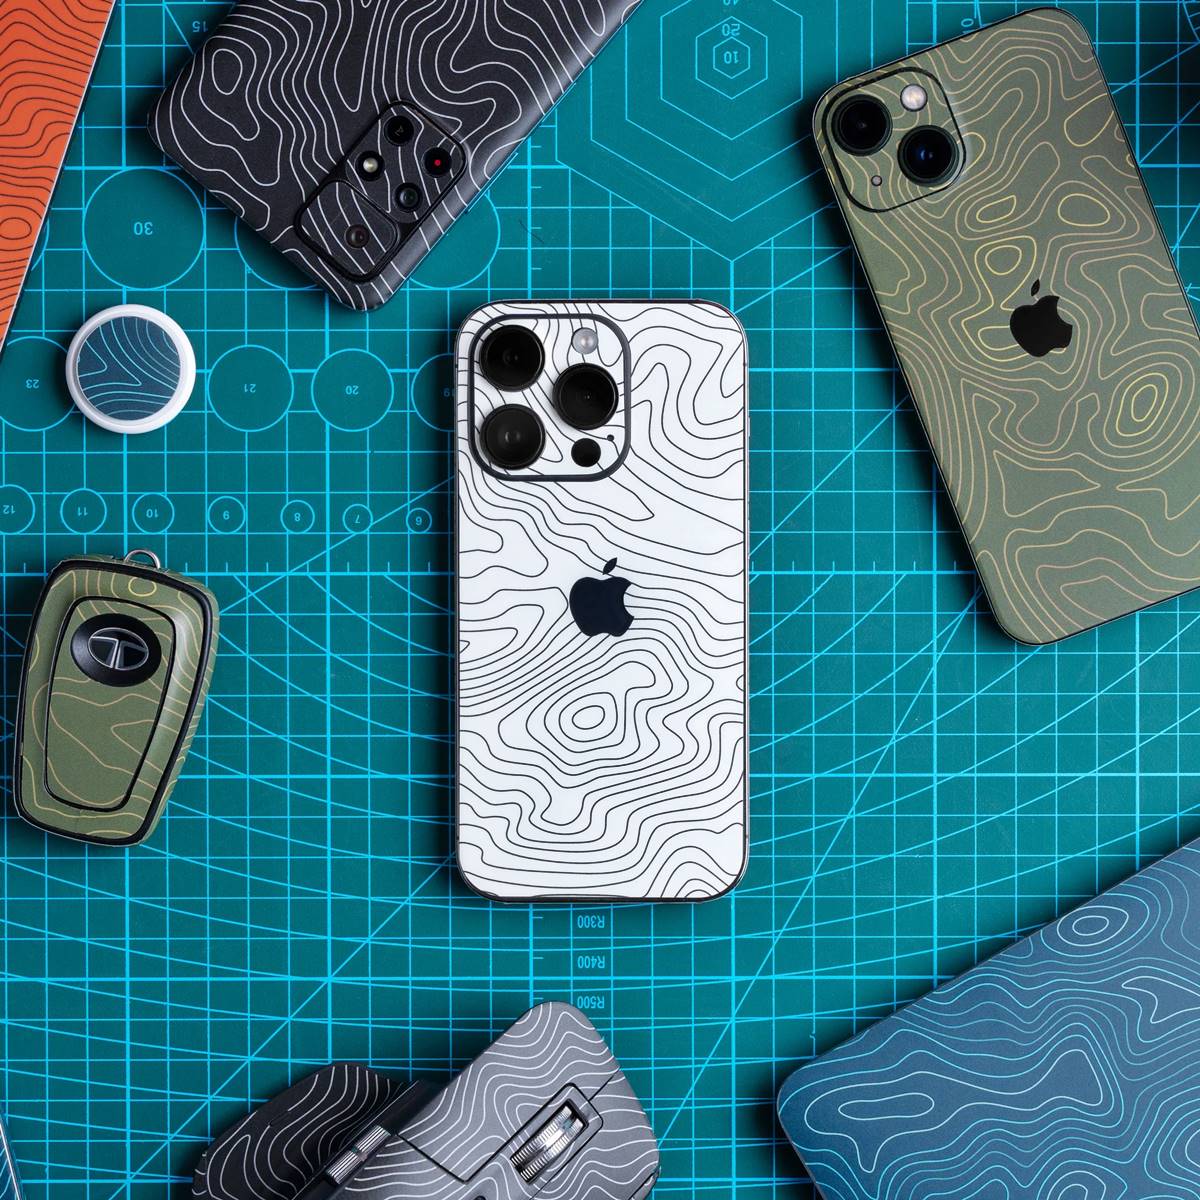 10-best-skins-and-wraps-for-iphone-12-pro-max-to-buy-in-2023